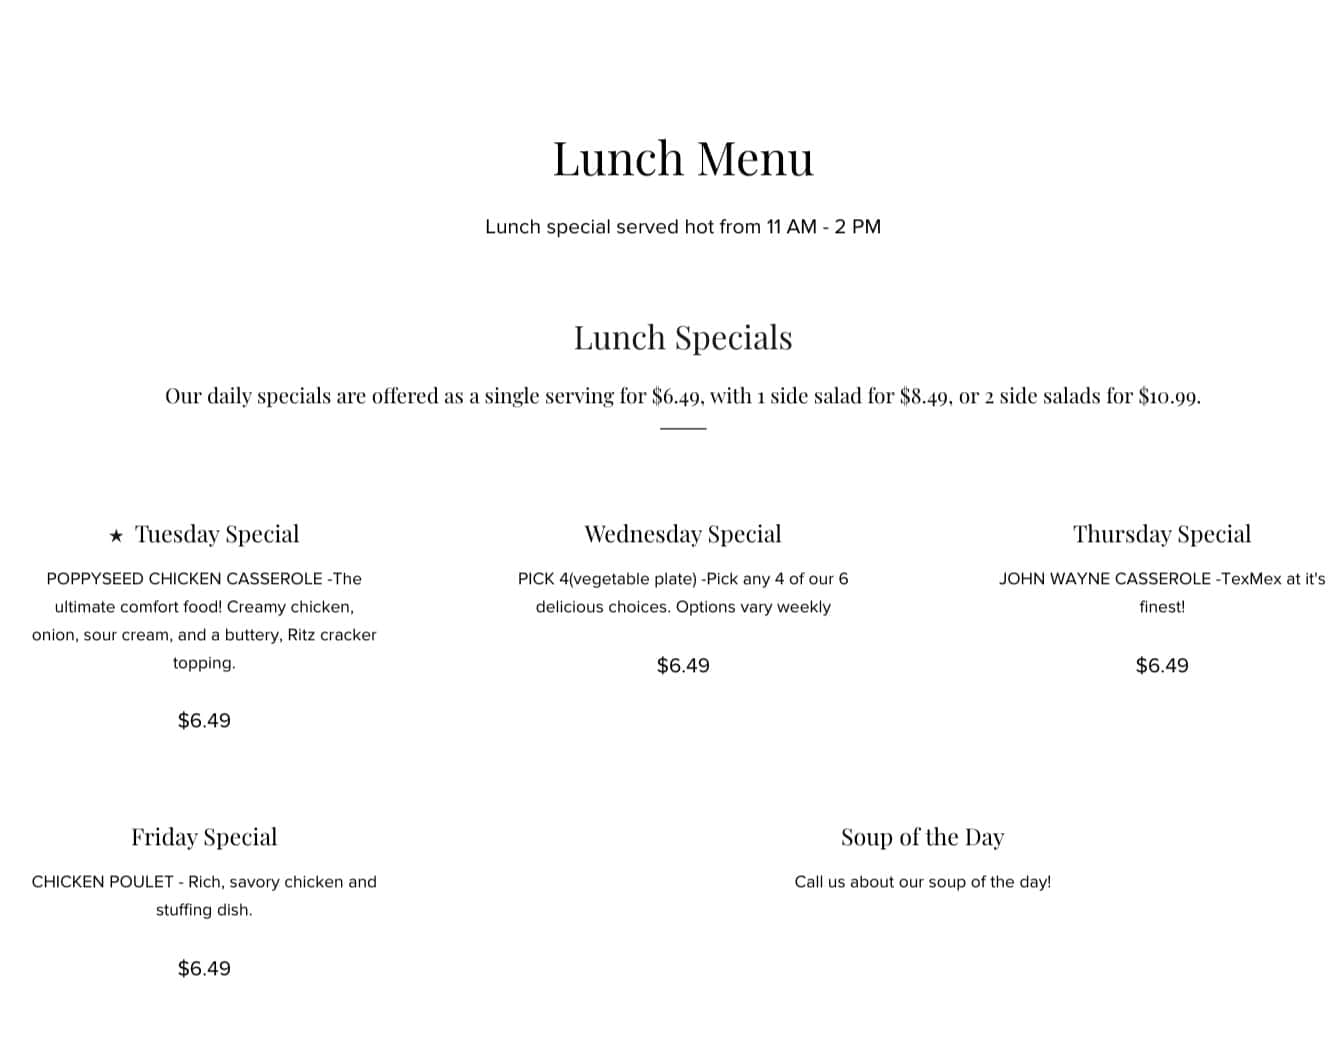 Suzanne's Bakery & Eatery Lunch Menu